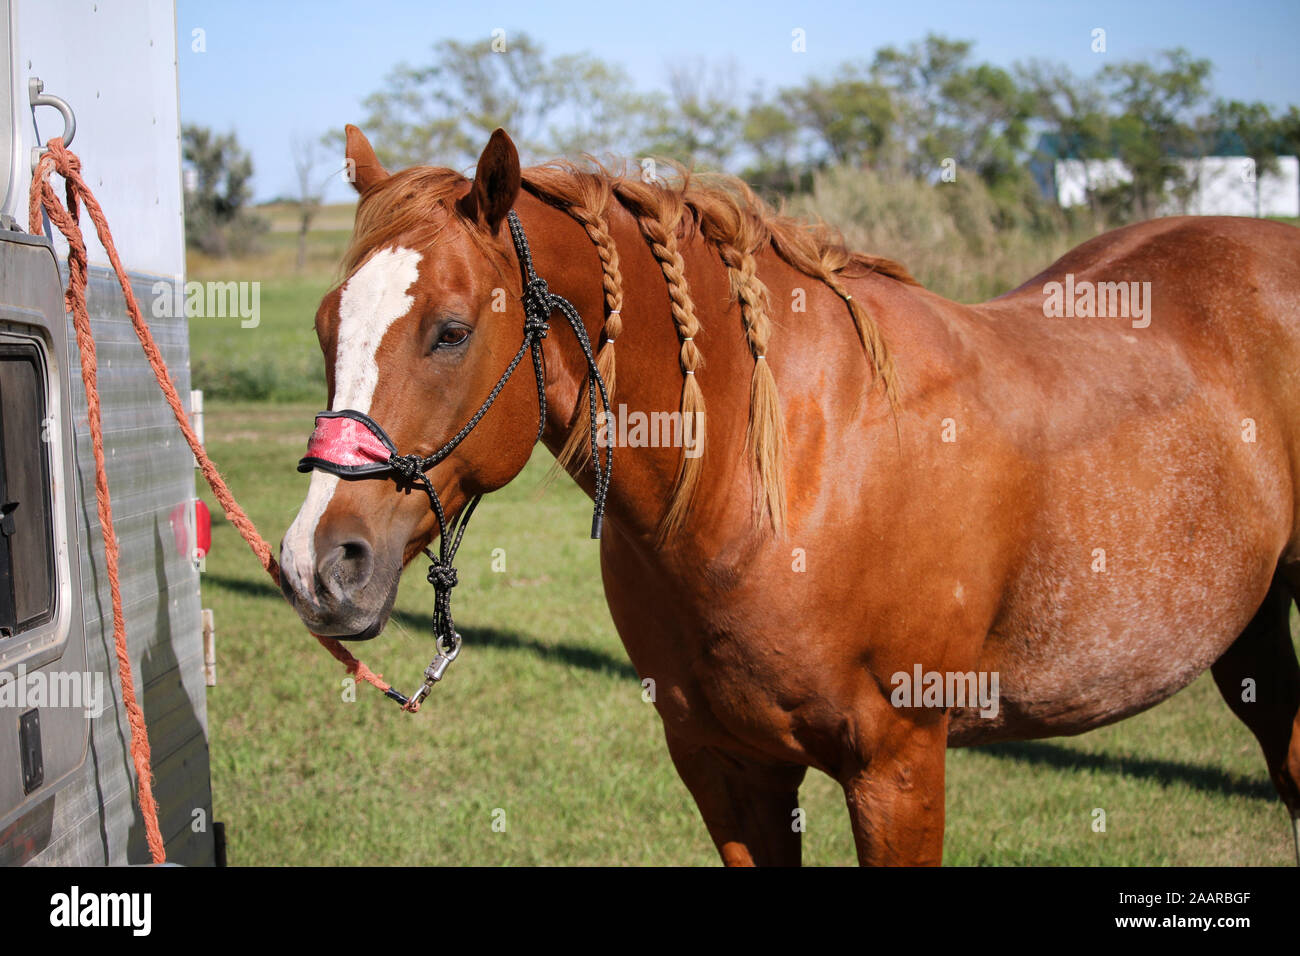 Race Horse In A Horse Trailer The Horse Has Long Tail And It Is Captured In Rear View The Trailer Is Open And Parked Stock Photo Alamy